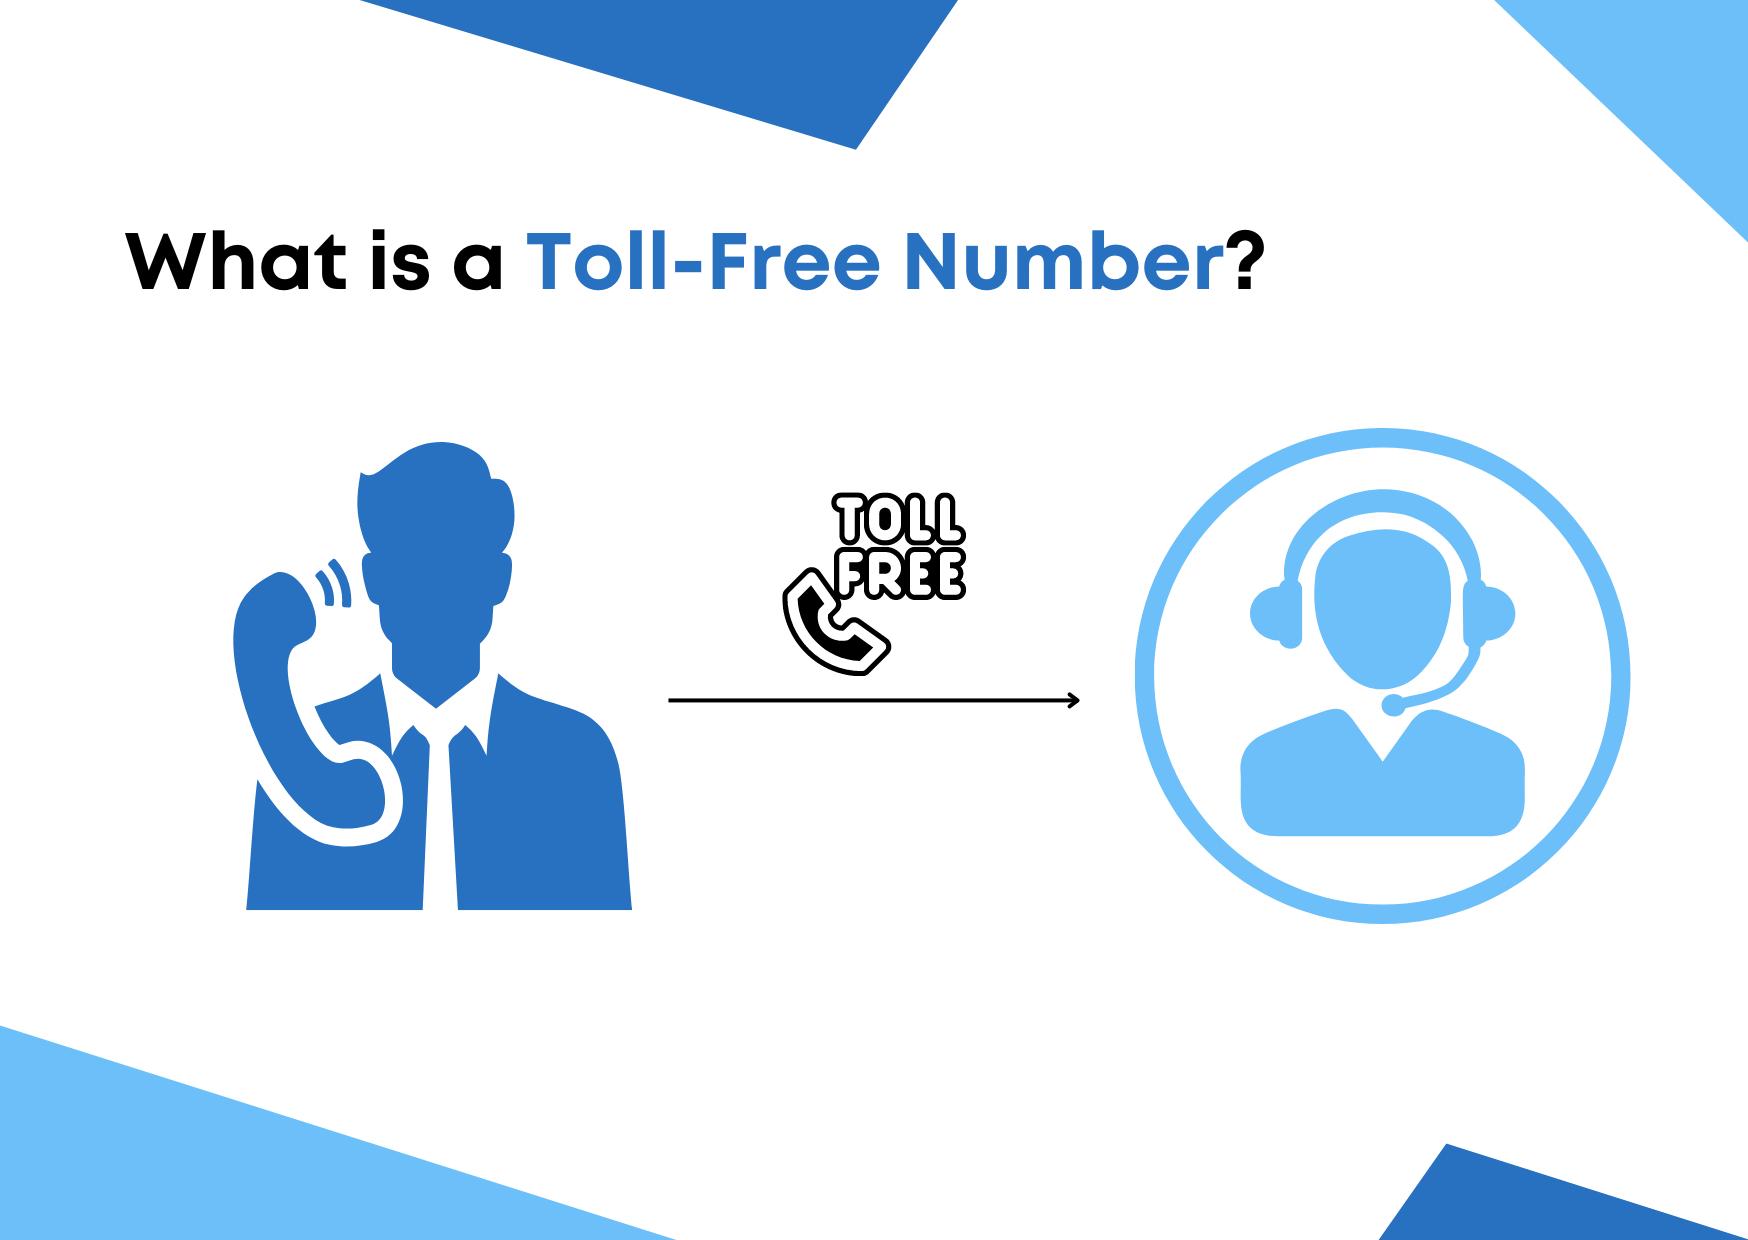 Toll Free Numbers